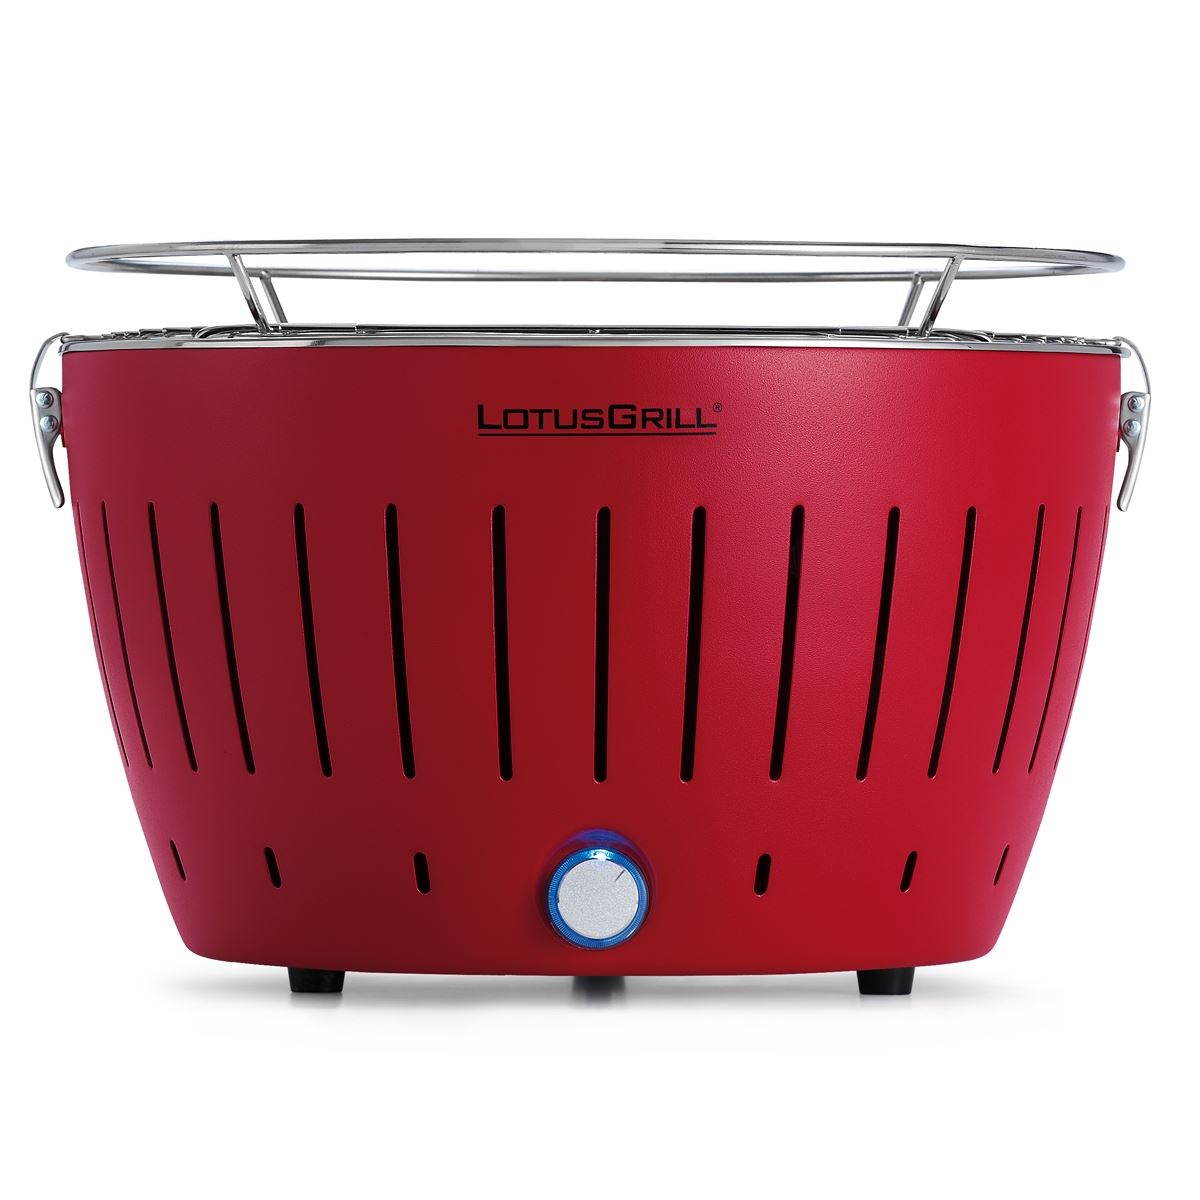 Can you use any charcoal in a LotusGrill BBQ?